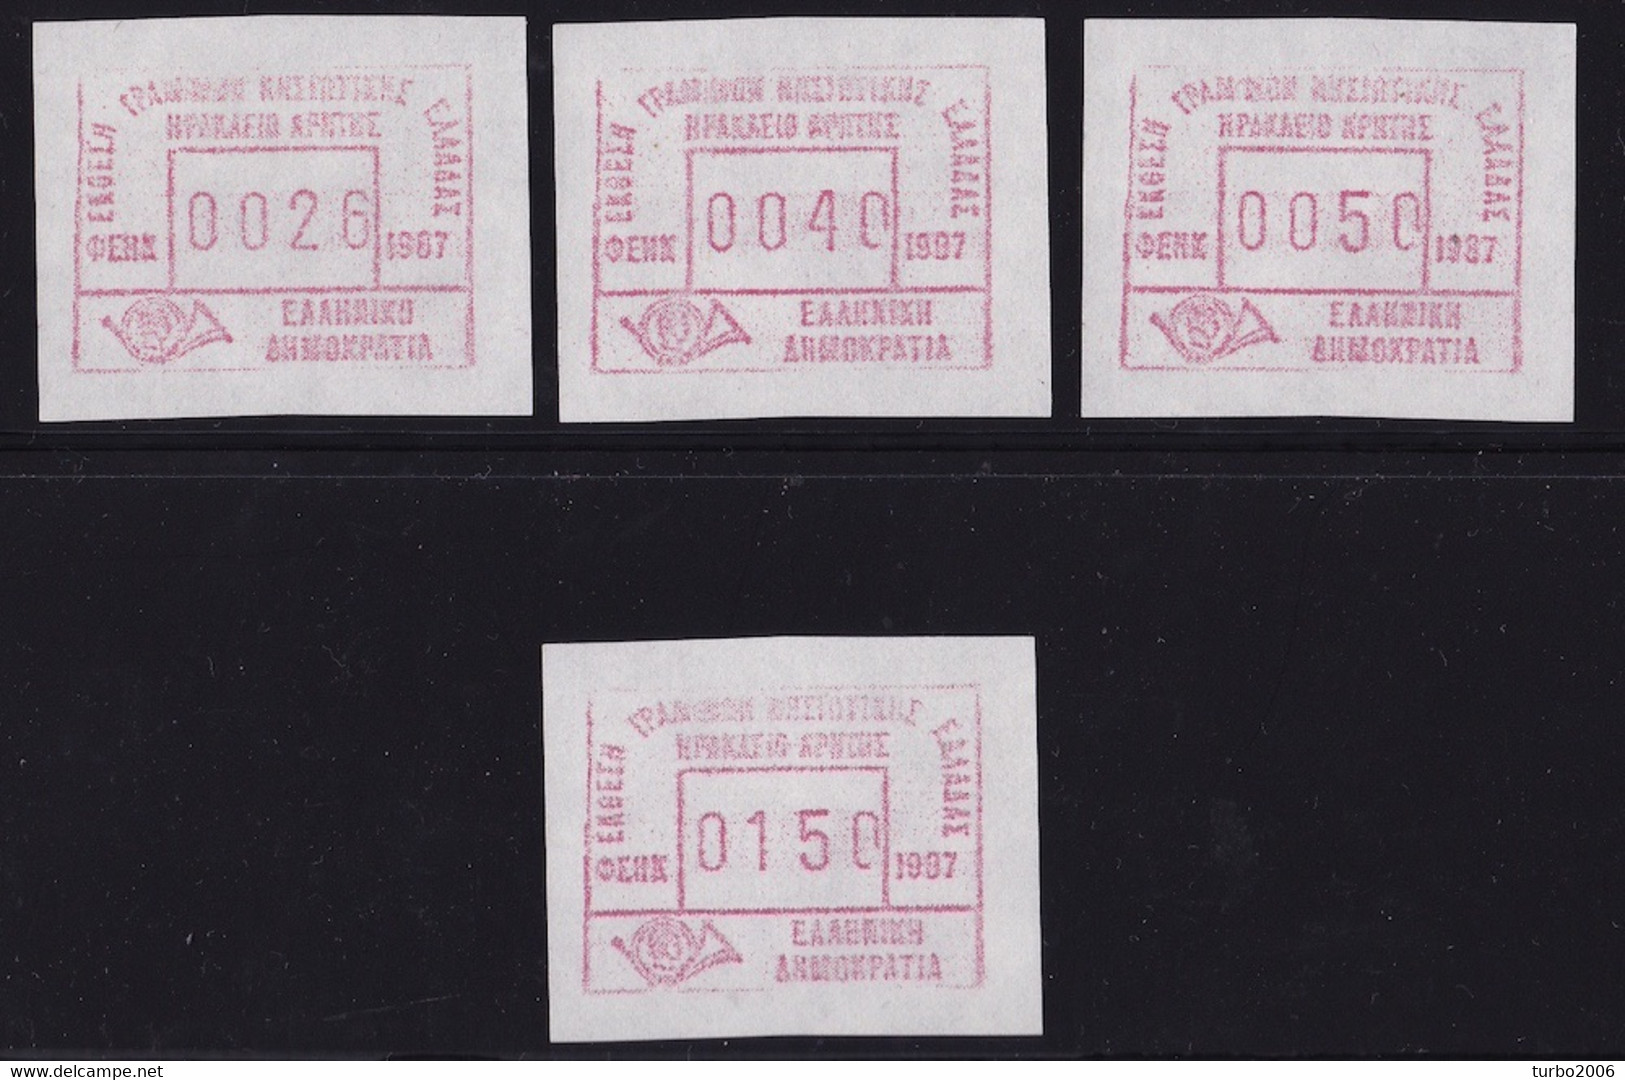 GREECE 1987 FRAMA Stamps For Philatelic Exhabition Of Heraklion Exhabition Set Of 26-40-50 Dr + 150 D MNH Hellas M 14 I - Machine Labels [ATM]